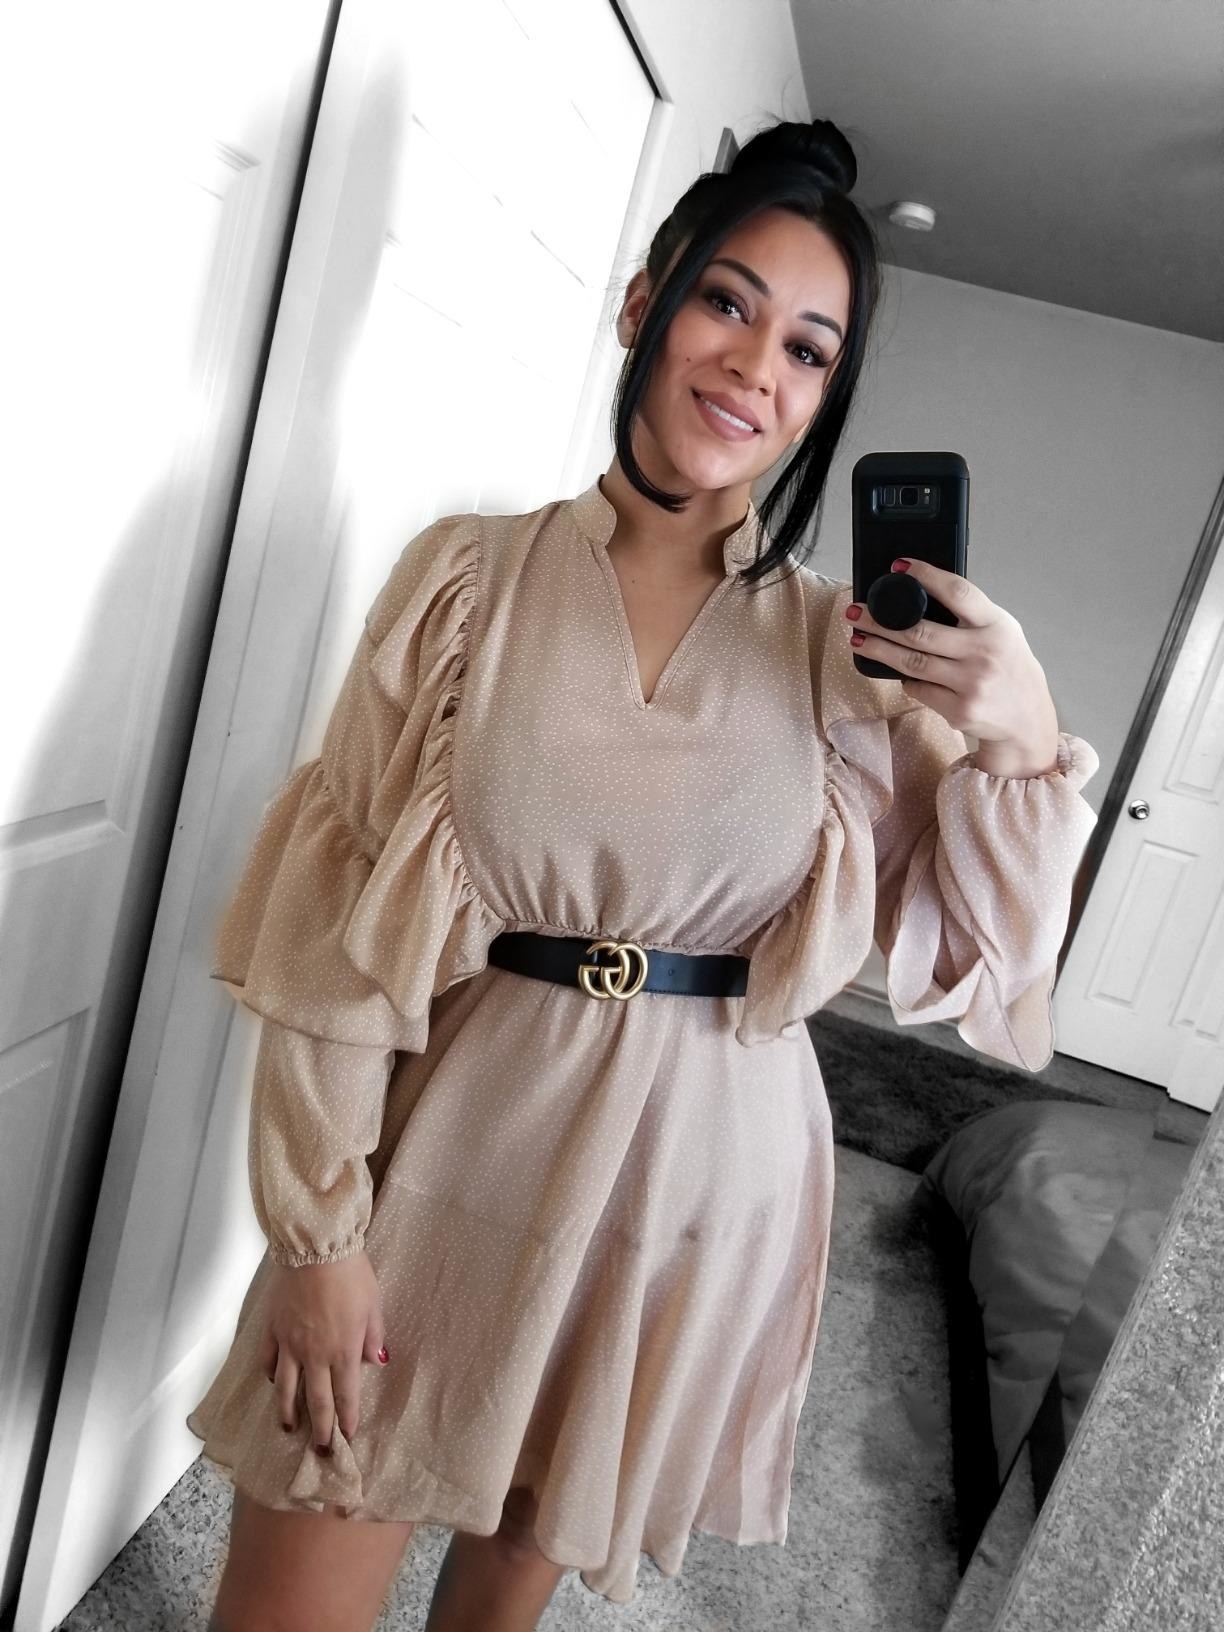 A reviewer photo of the dress in tan